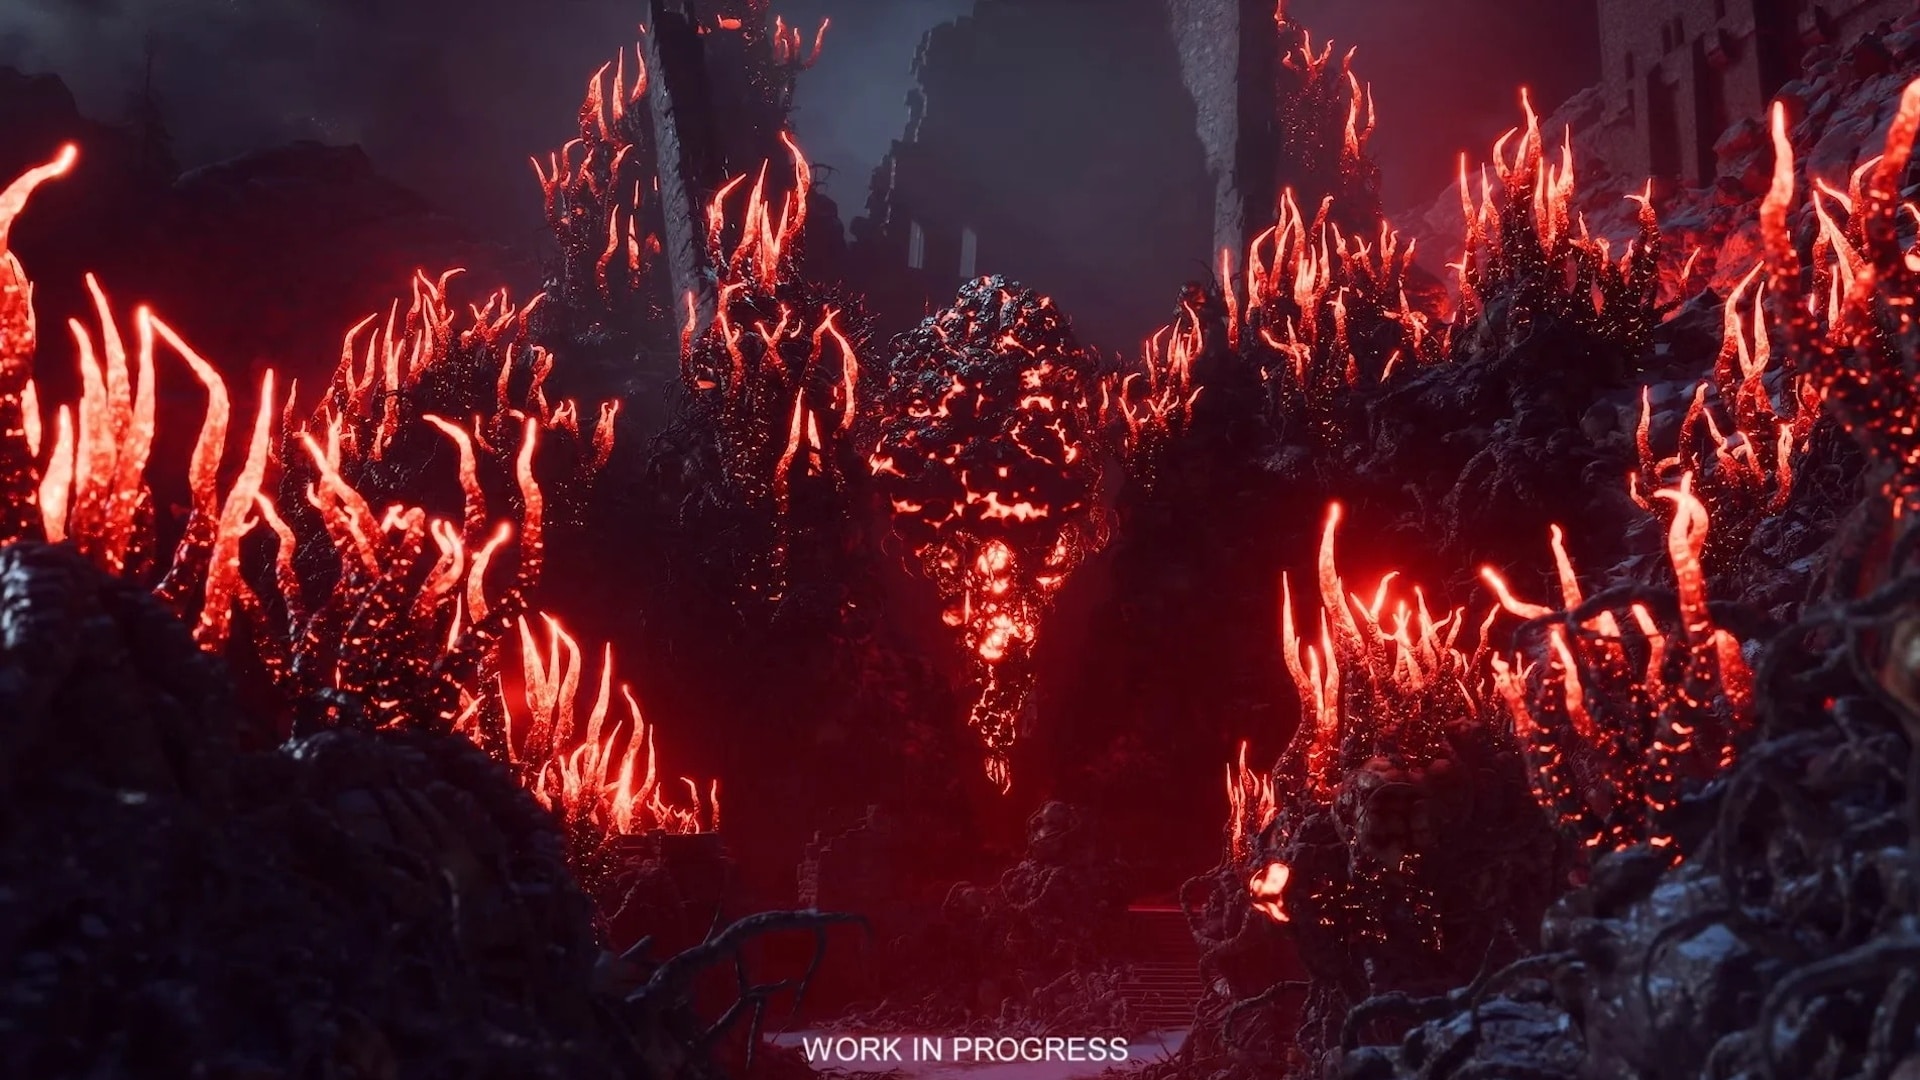 Red lyrium erupts from the ground - a pretty bad sign.